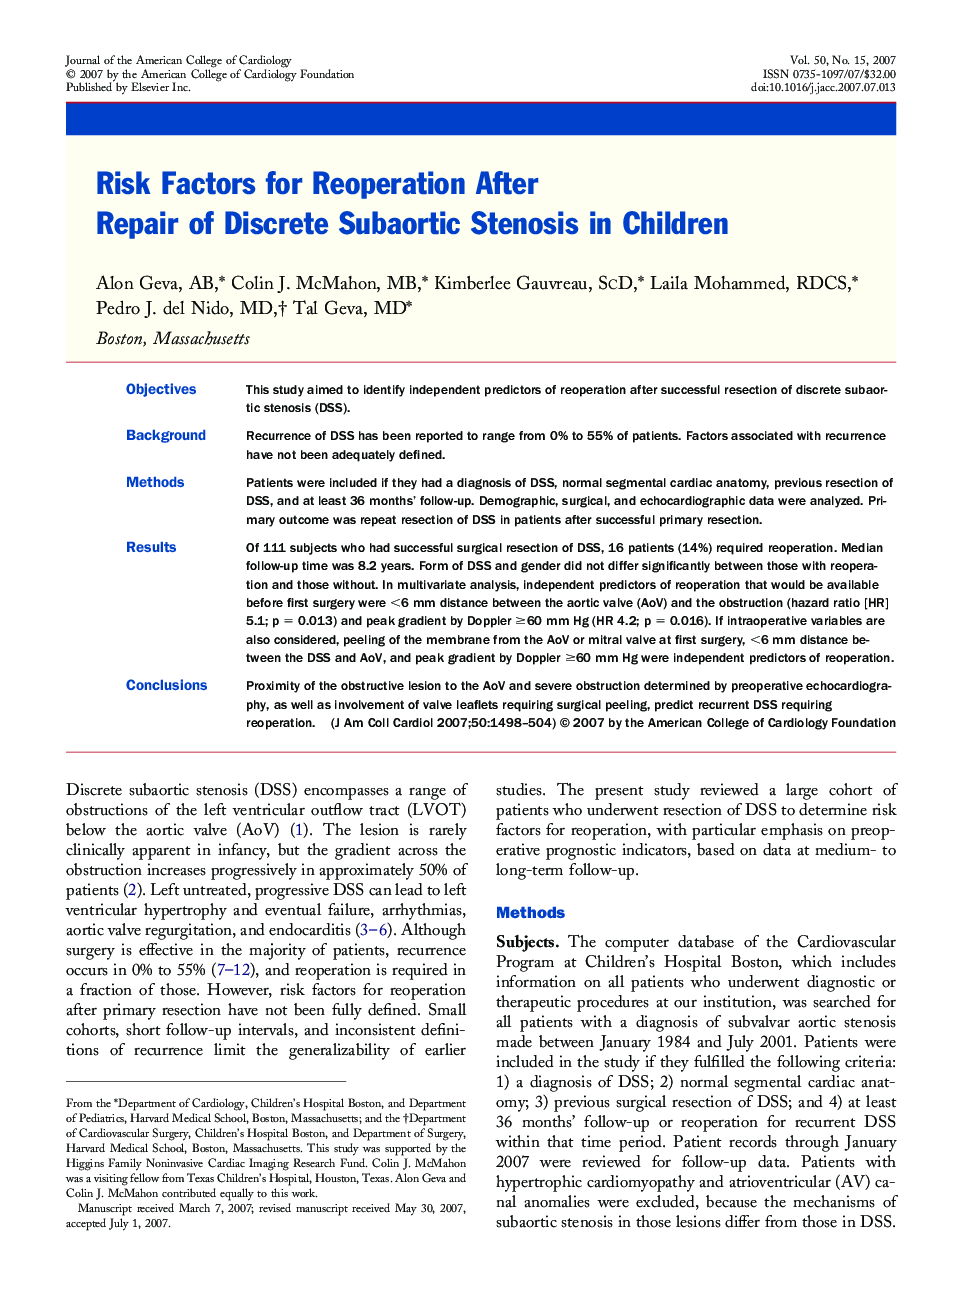 Risk Factors for Reoperation After Repair of Discrete Subaortic Stenosis in Children 